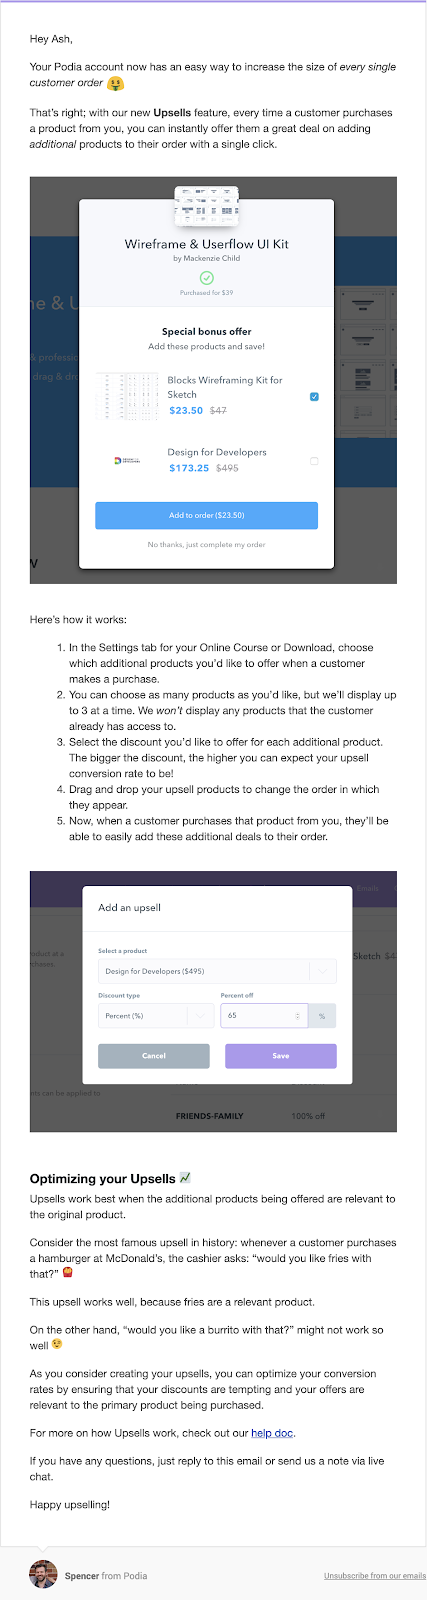 Screenshot of product update emails from Podia